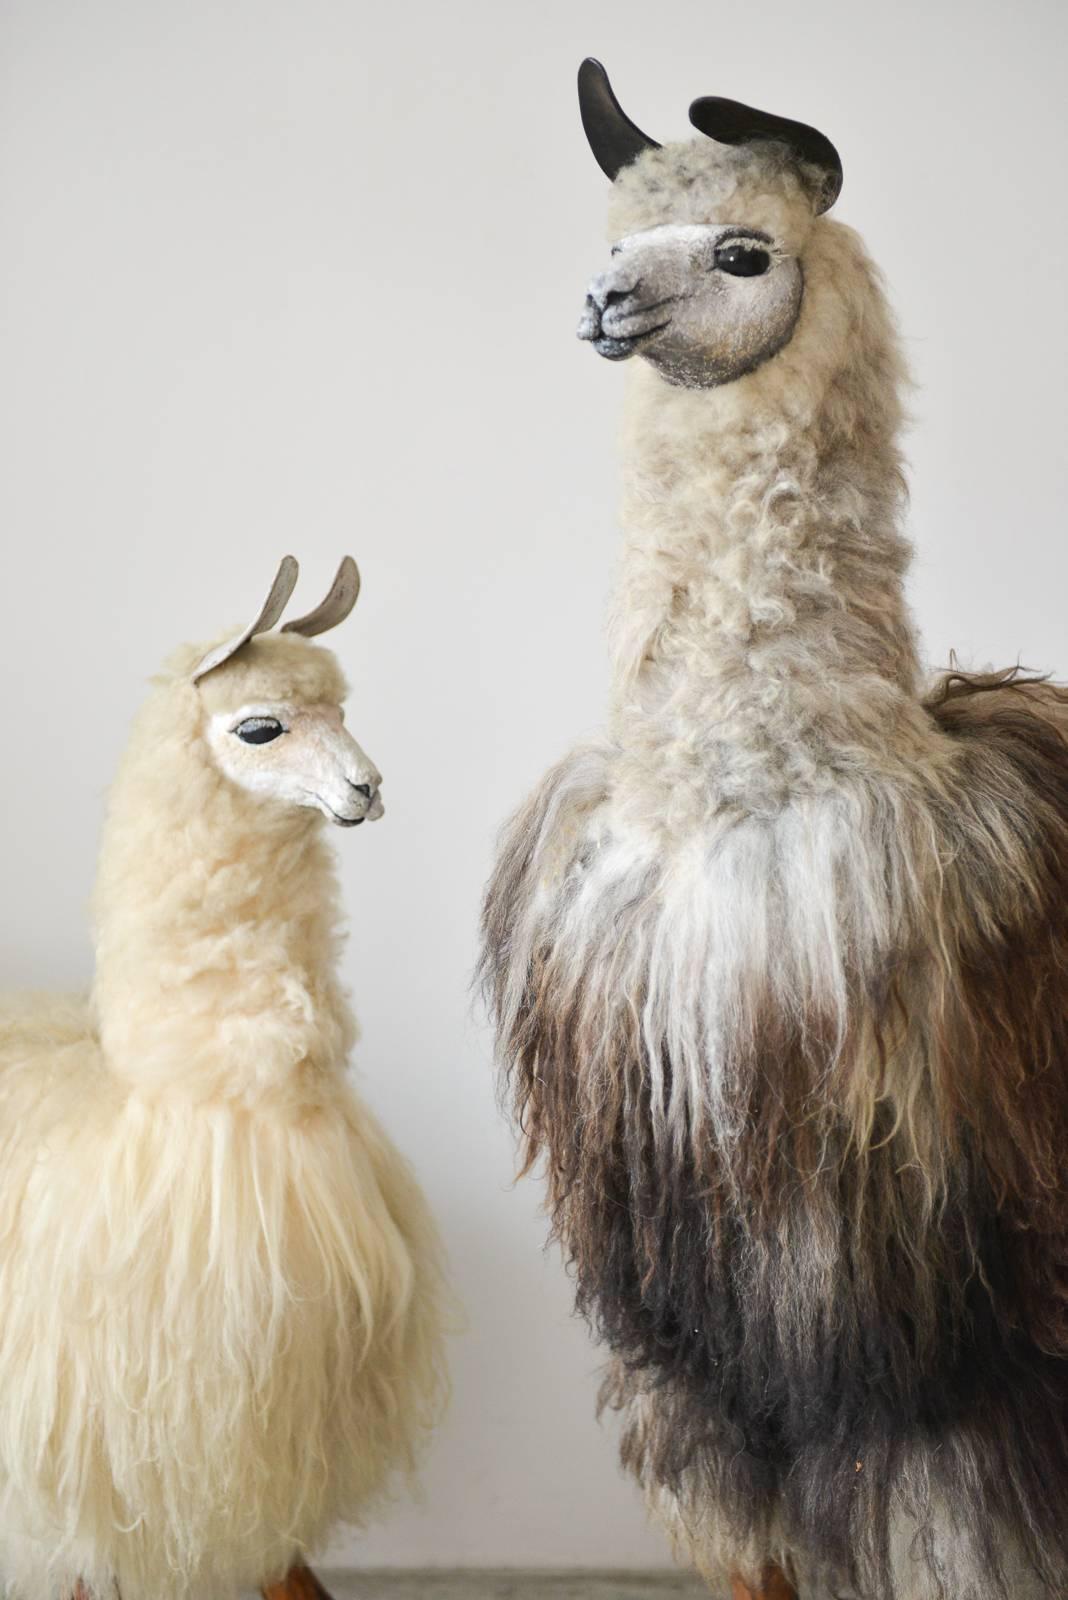 One of a kind pair of handmade lifesize Llama statues. Commissioned and handmade for the largest Llama breeder in North America. From the breeders private collection. Provenance included. hand-carved faces of wood, real llama fur, wooden legs and